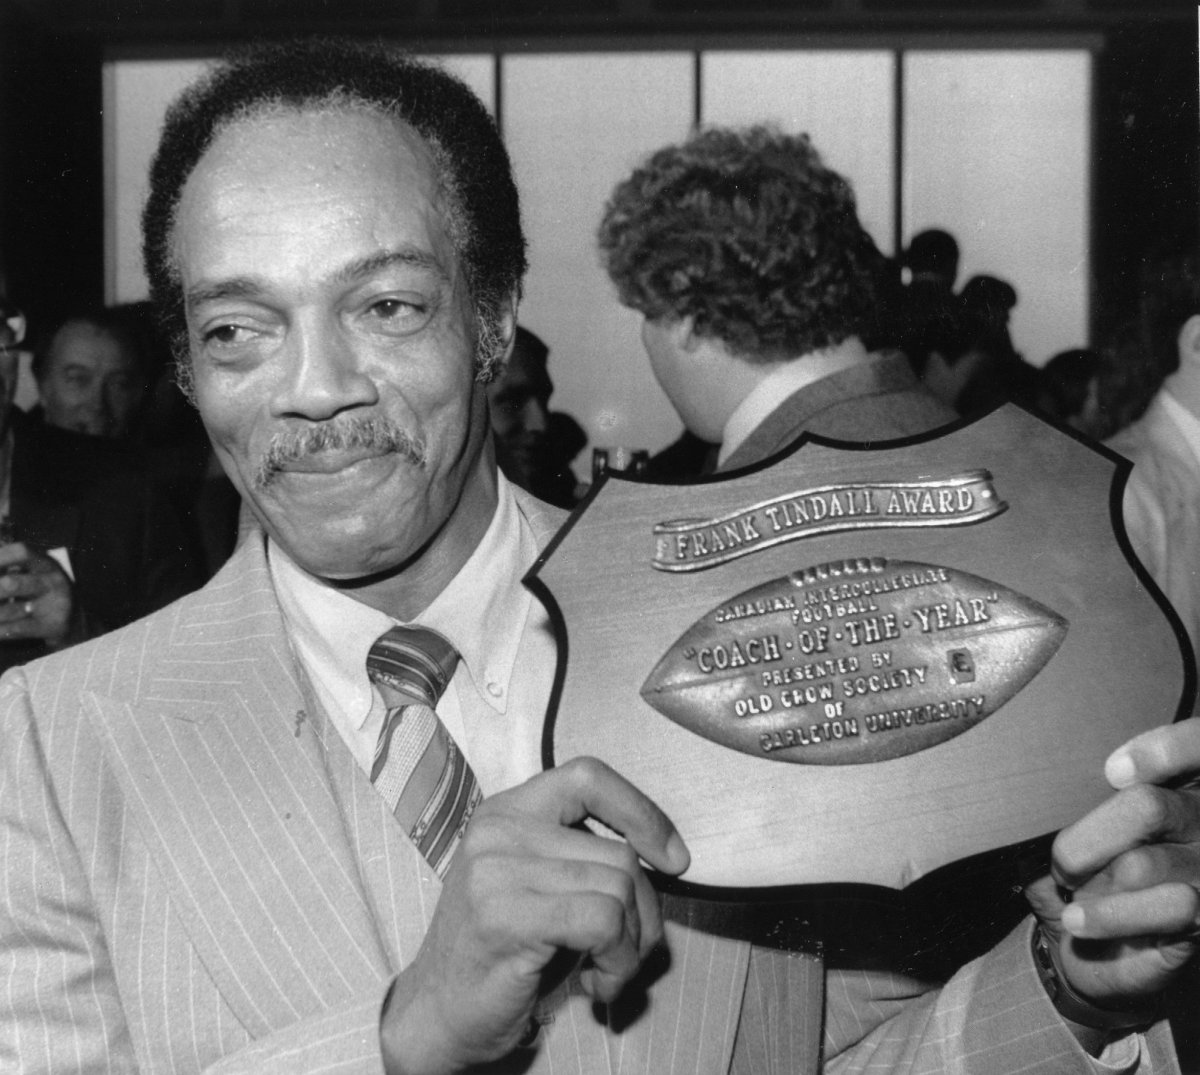 Head Coach of the McMaster University Marauders football team, Bernie Custis, shows off the award for Canadian Interuniversity Athletic Union coach of the year in Toronto on November 18, 1982.